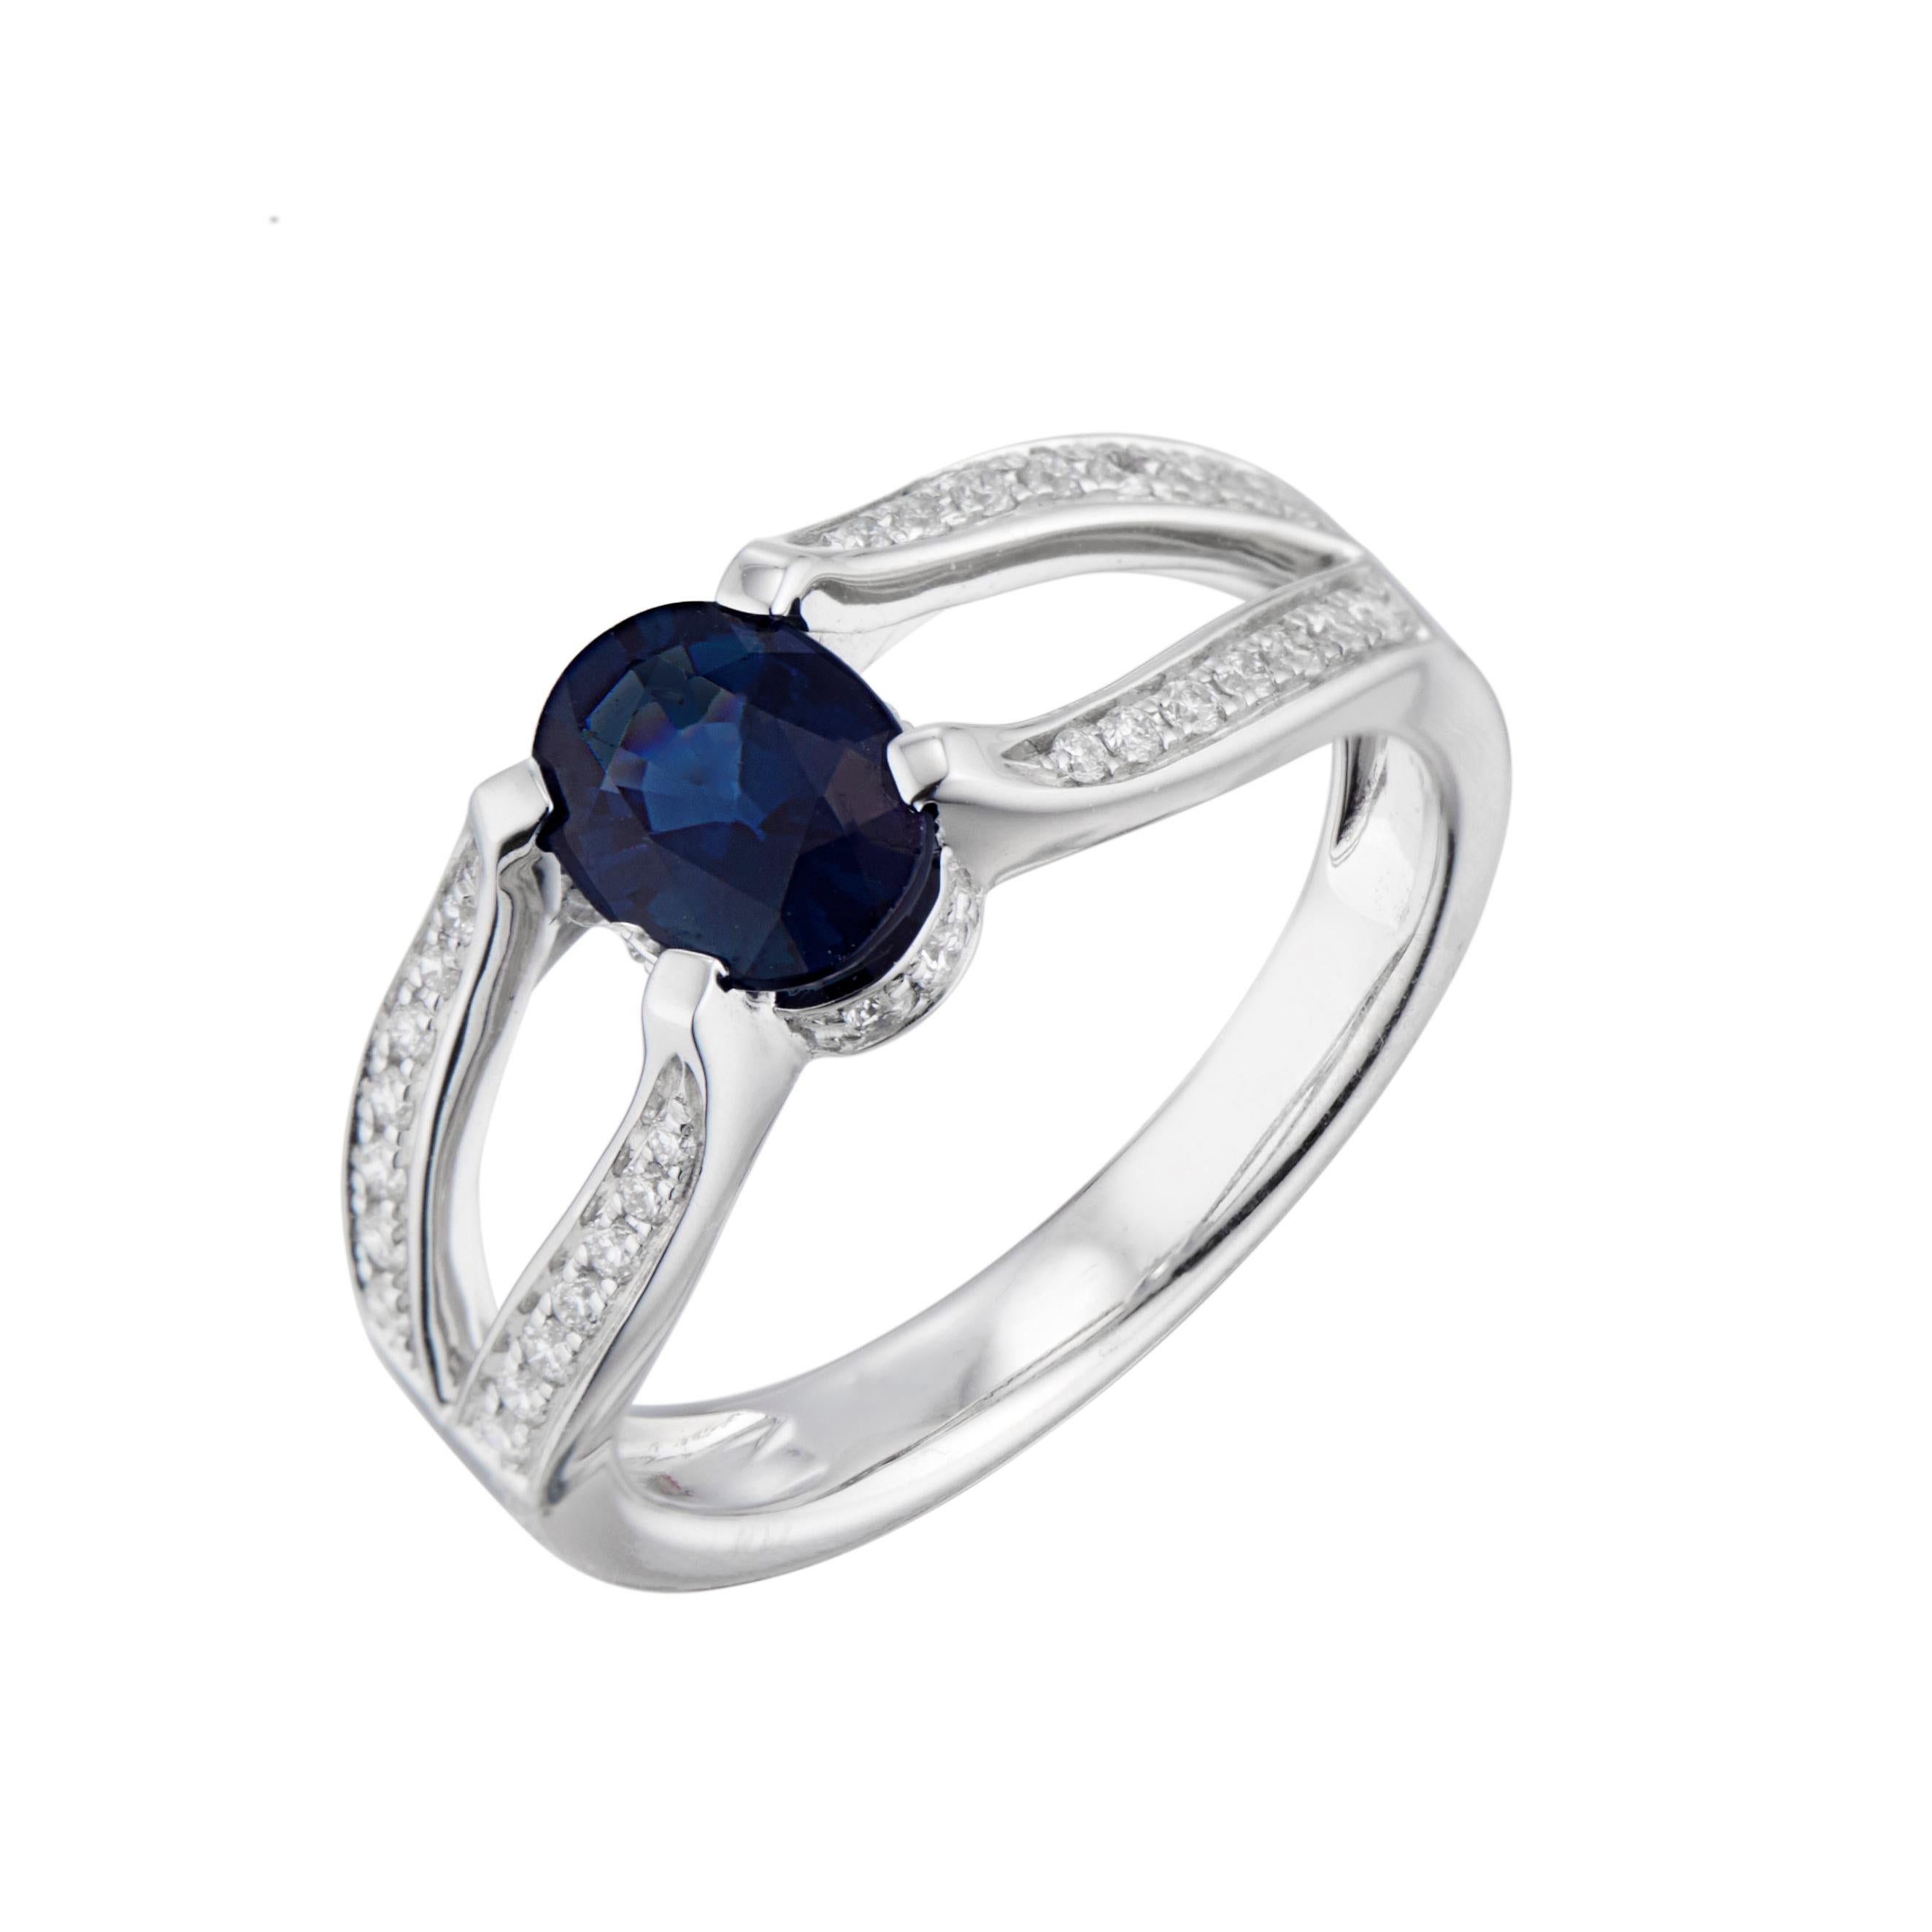 Oval Cut 1.19 Carat Blue Sapphire Diamond White Gold Ring  For Sale